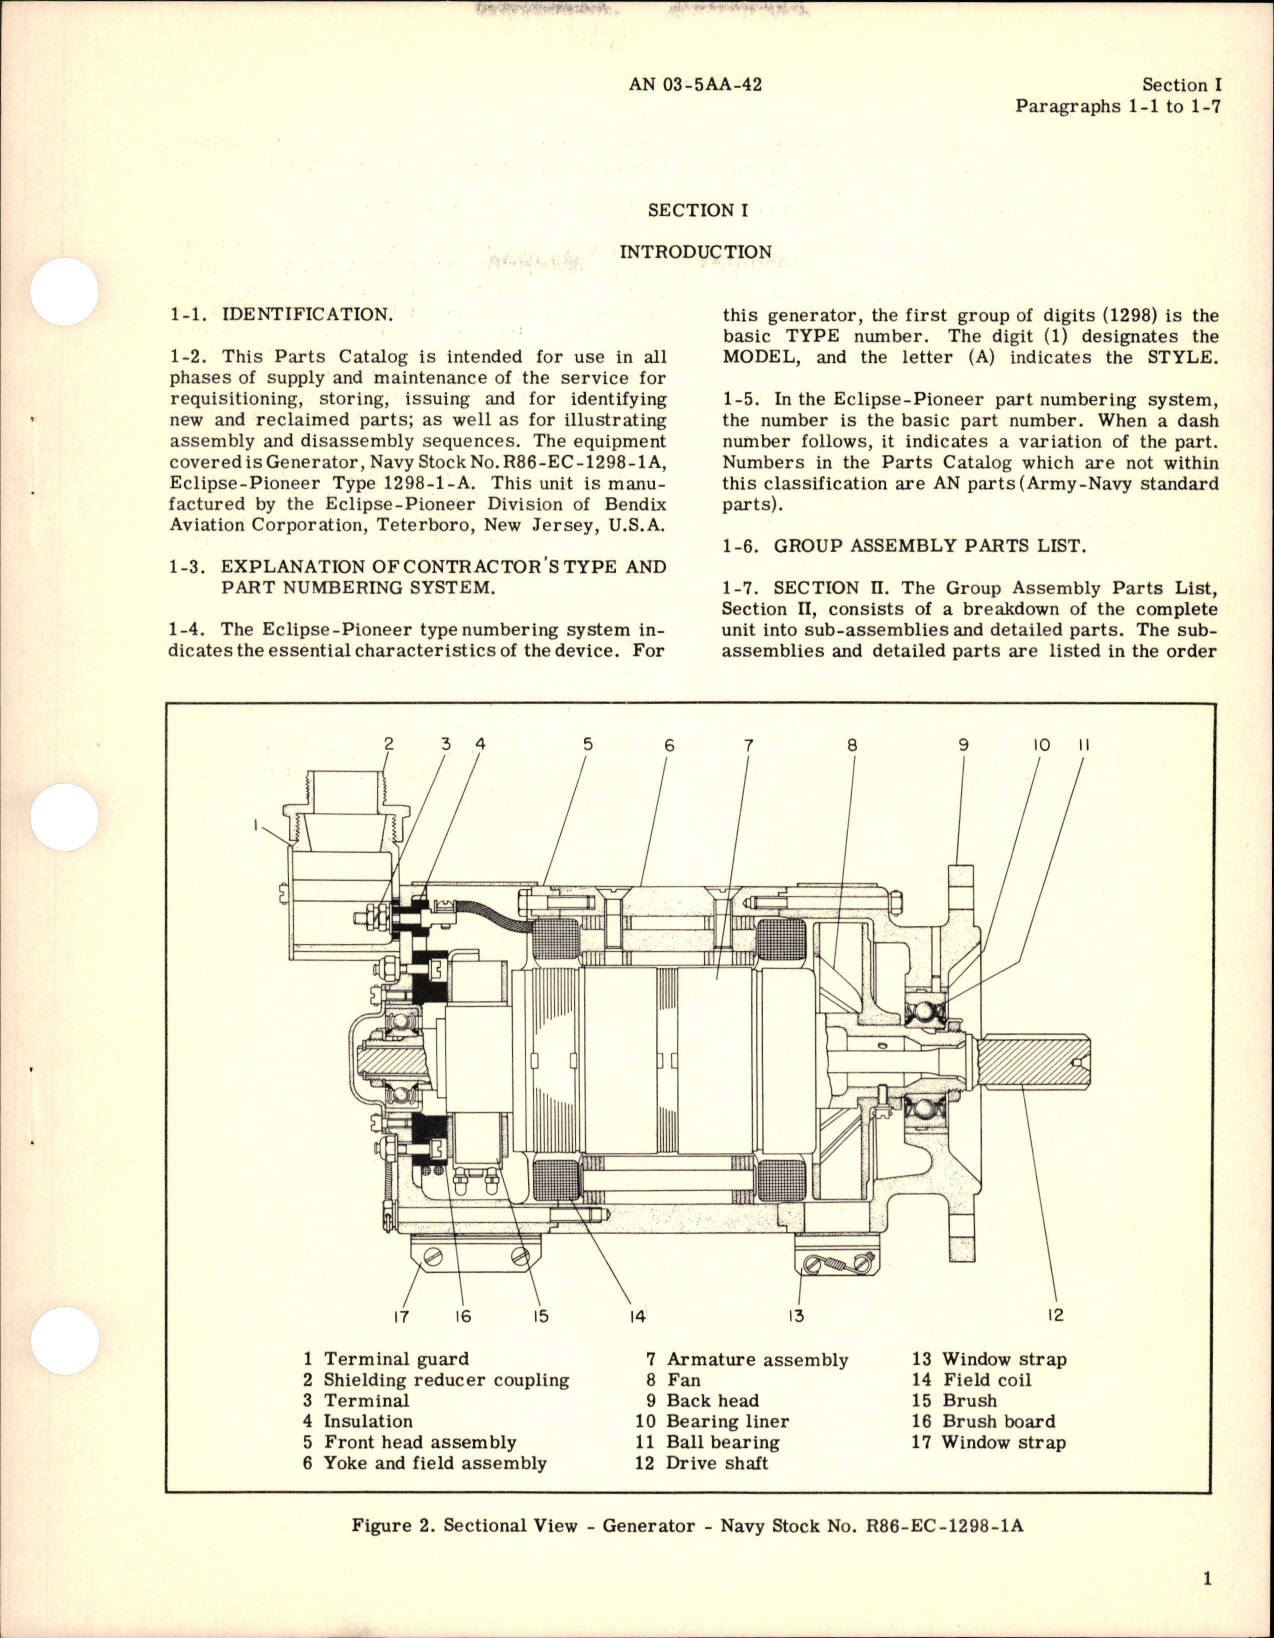 Sample page 5 from AirCorps Library document: Parts Catalog for Generator - Part 1298-1-A - Buaer DRW No. E-1635-1